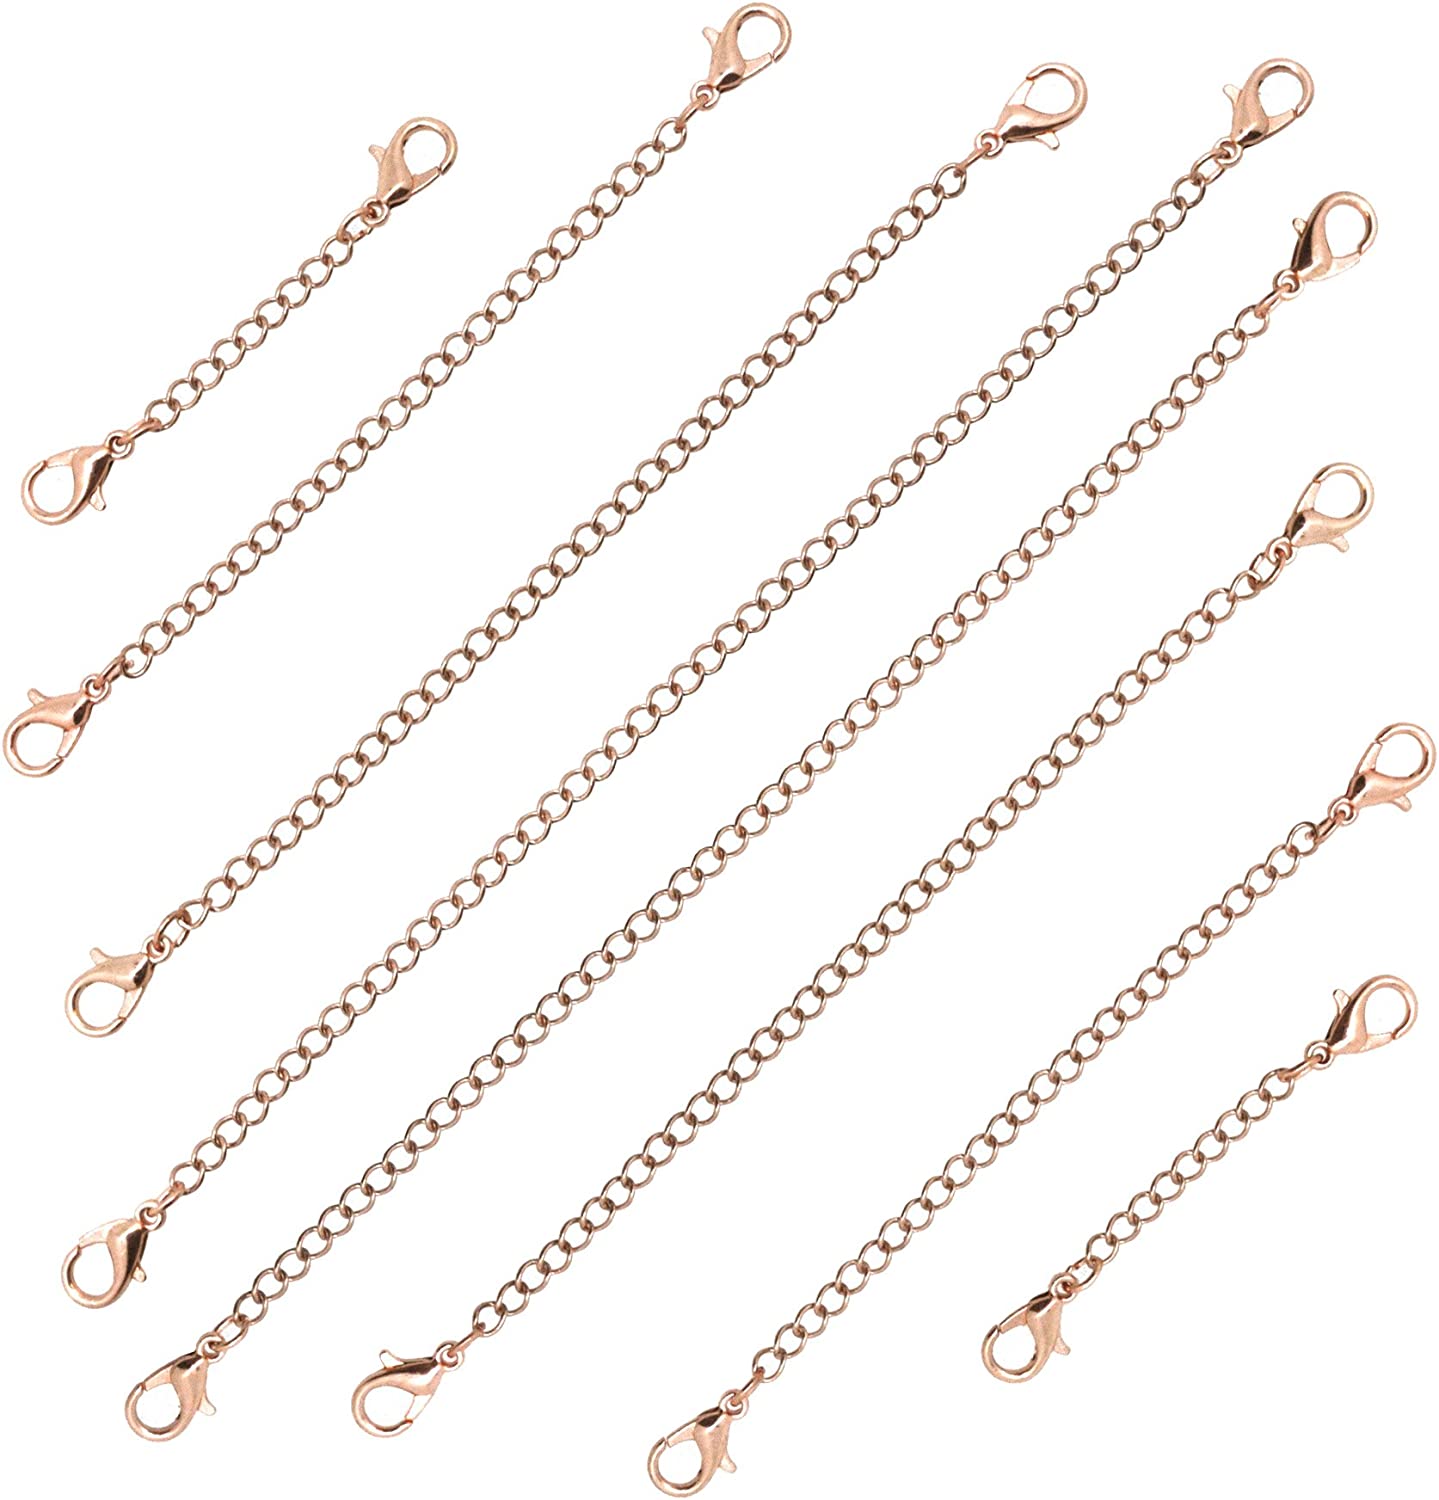 Paxcoo 12Pcs Chain Extender Jewelry Necklace Lobster Clasps and Closures  for Necklace Bracelet Jewelry Making Supplies